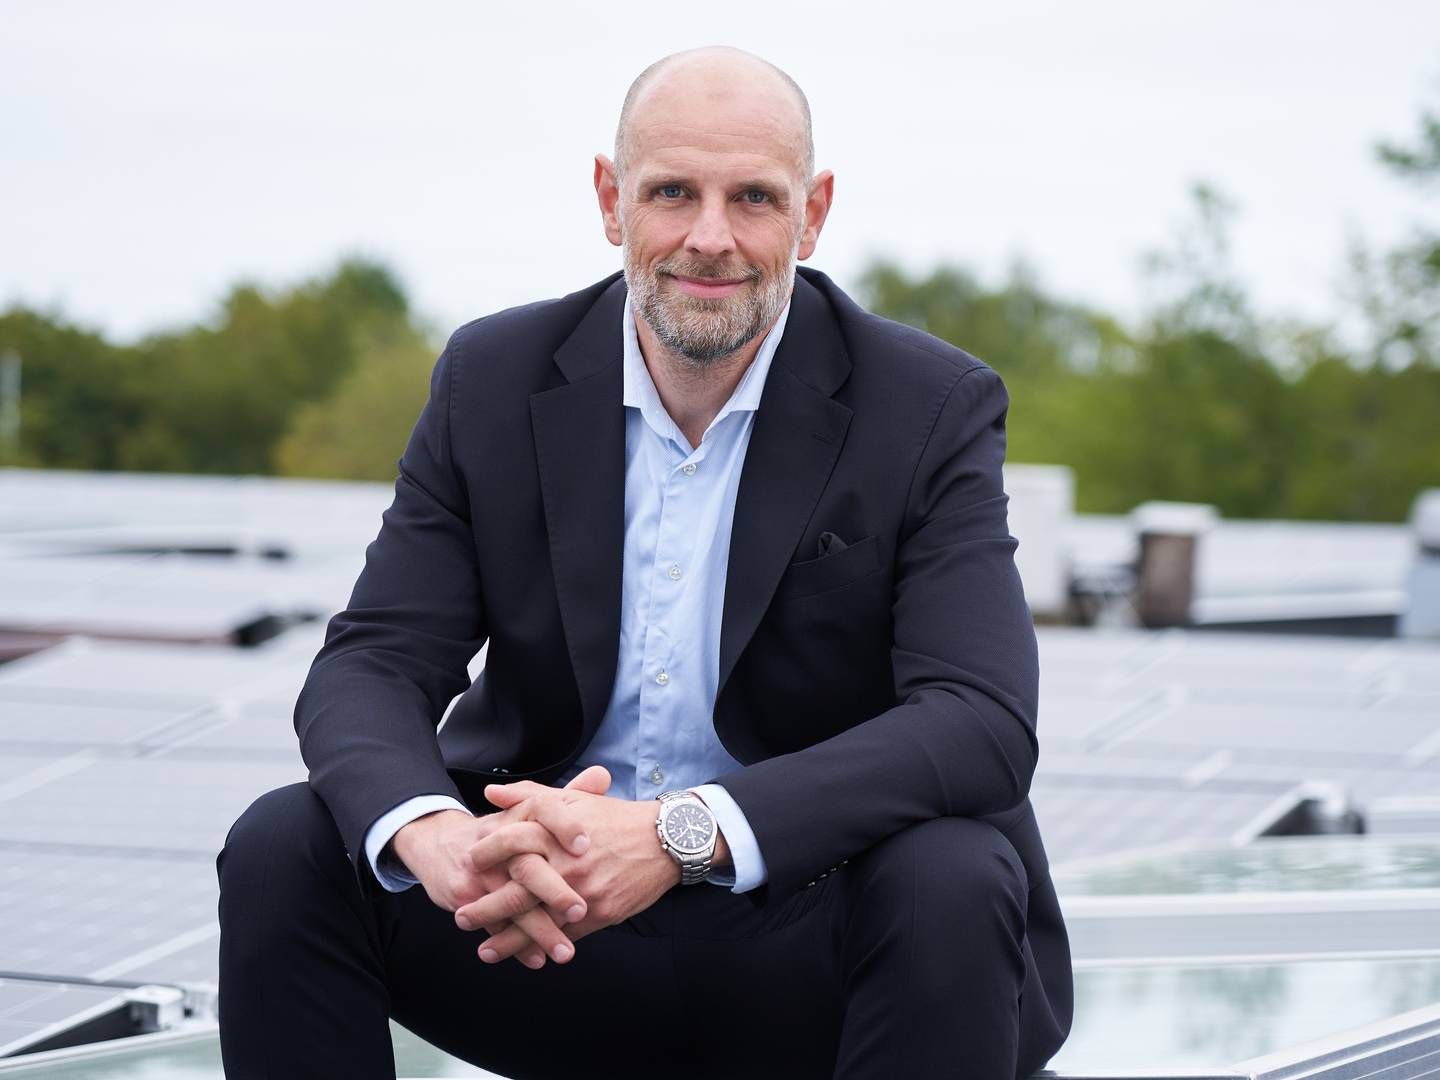 "We want to build the leading electricity trading platform in Europe, giving private investors the opportunity to invest in energy markets," says Bjørn Kunz Petersen, CEO of EIO Energy. | Photo: Eioenergy